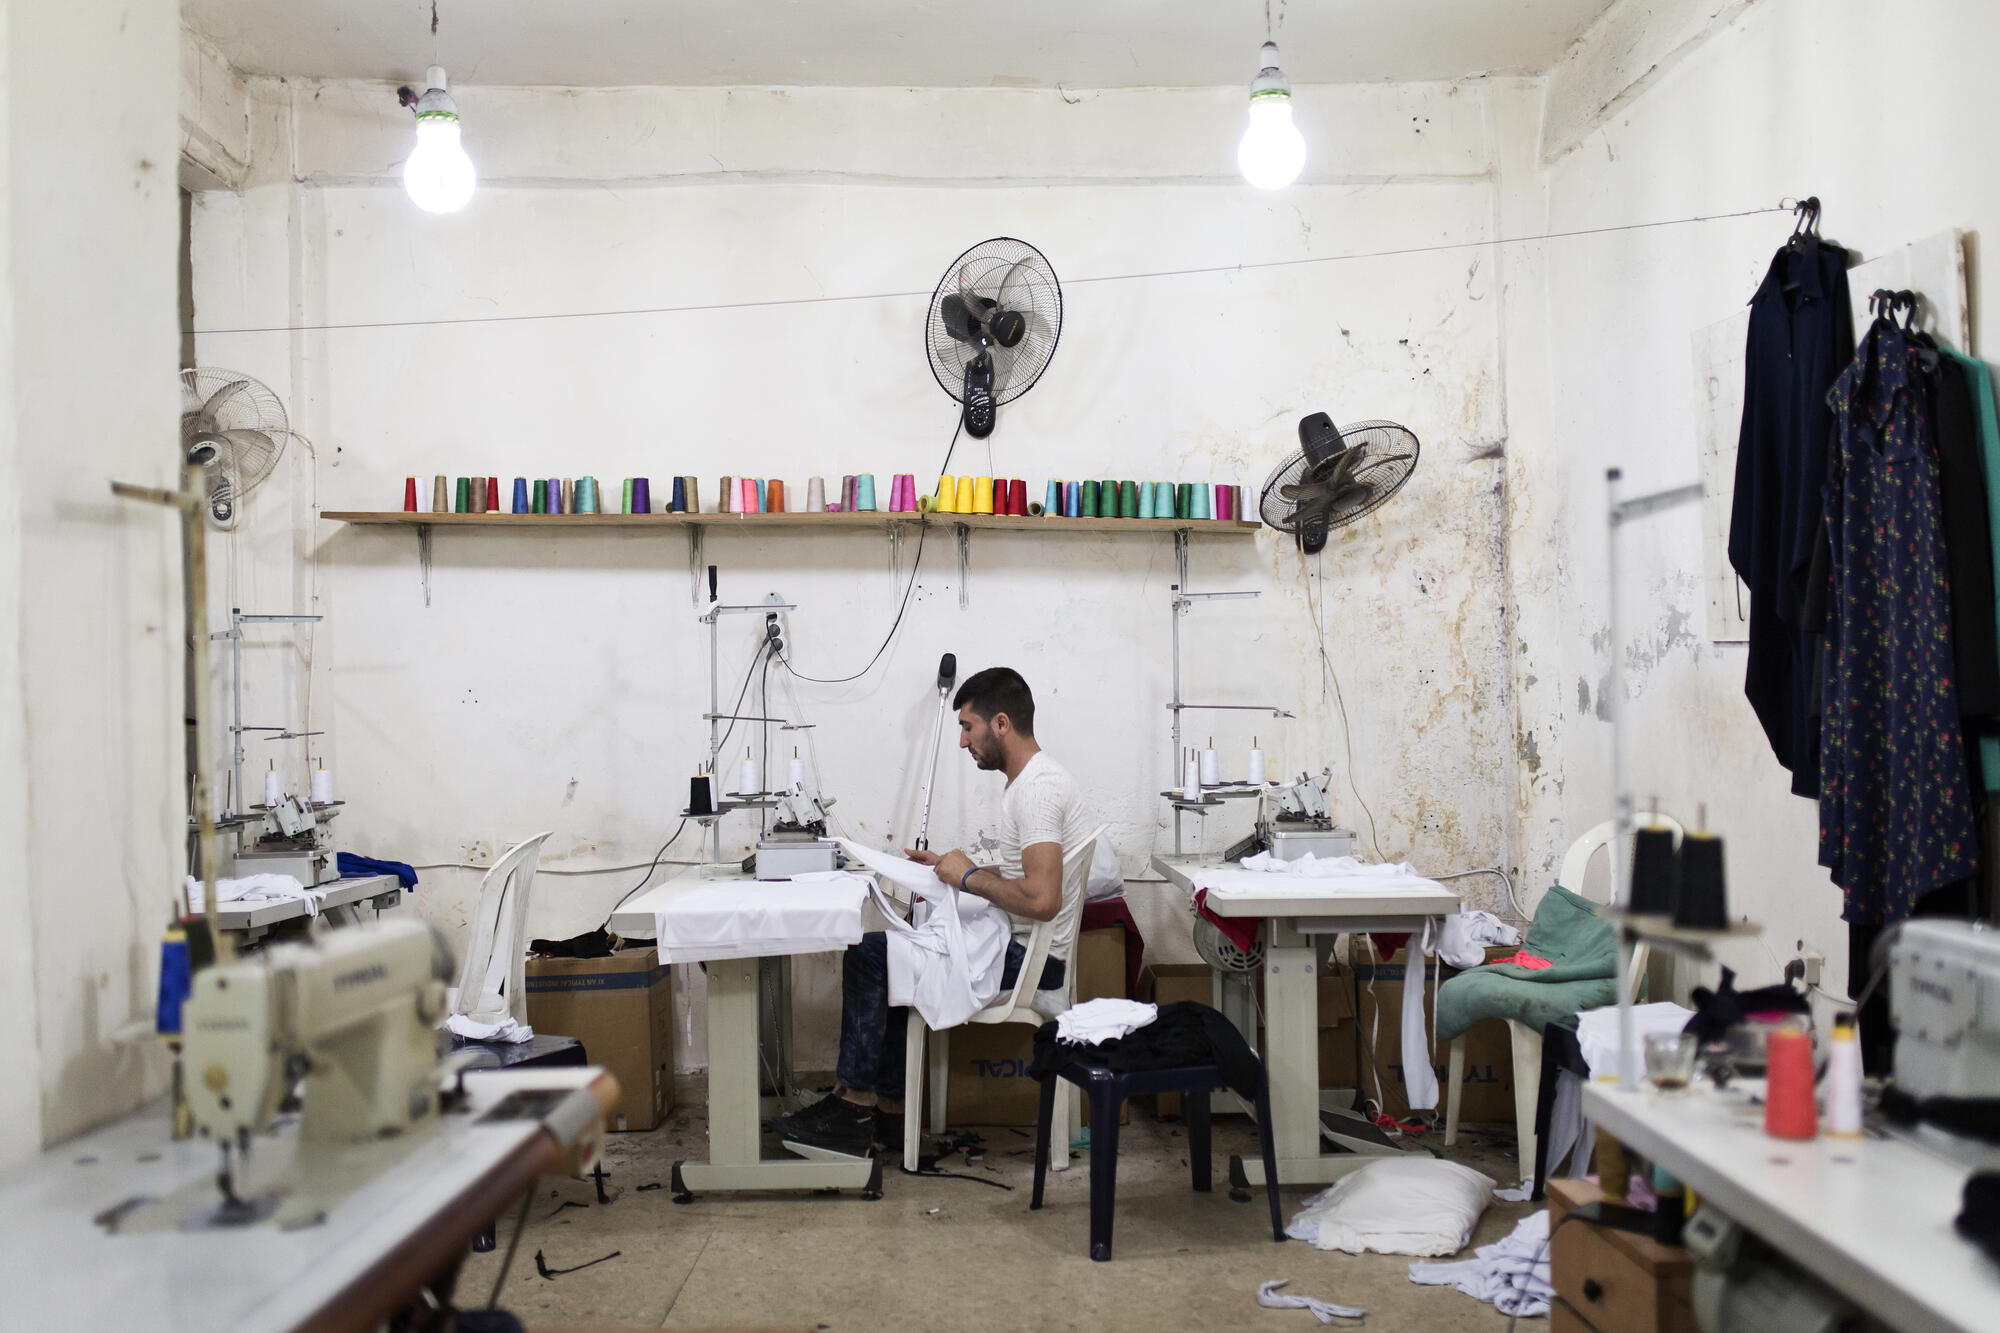 Mohamed Saleh Ismail works at a sewing machine in a tailoring workshop where he is an apprentice.